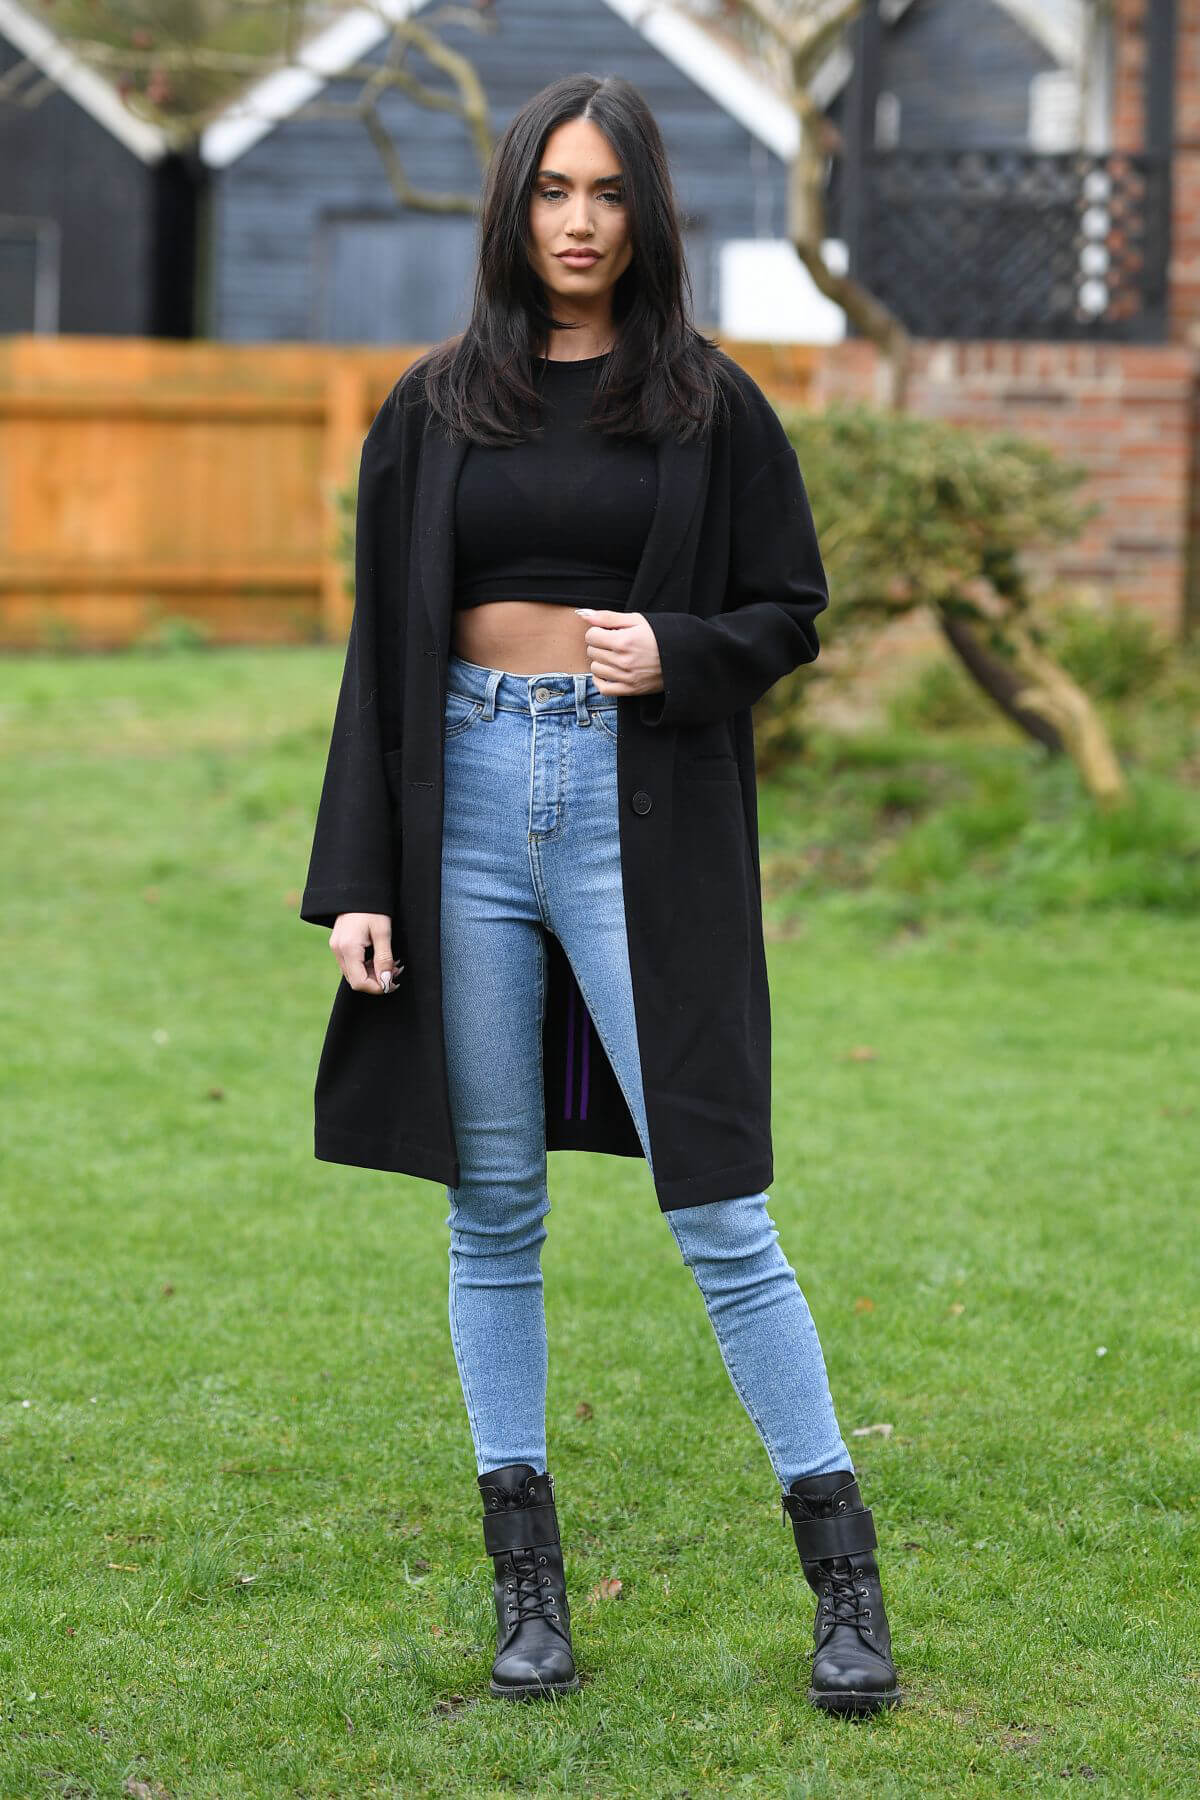 Clelia Theodorou in Denim on the Set of The Only Way is Essex 03/23/2021